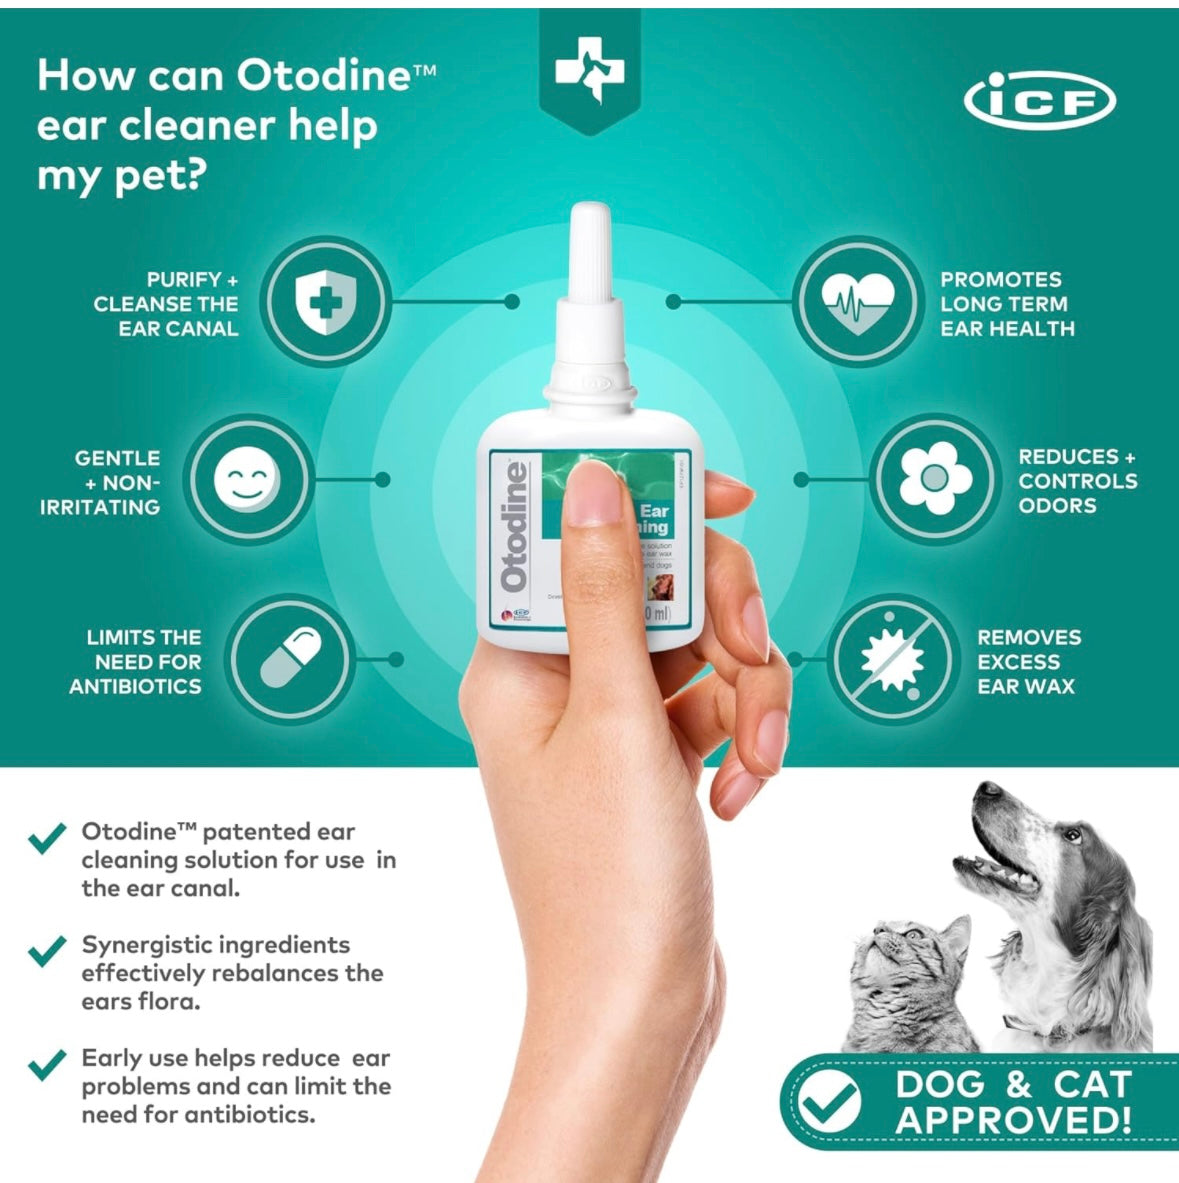 Dog Ear Cleaning a fast acting solution to relieve ear problems